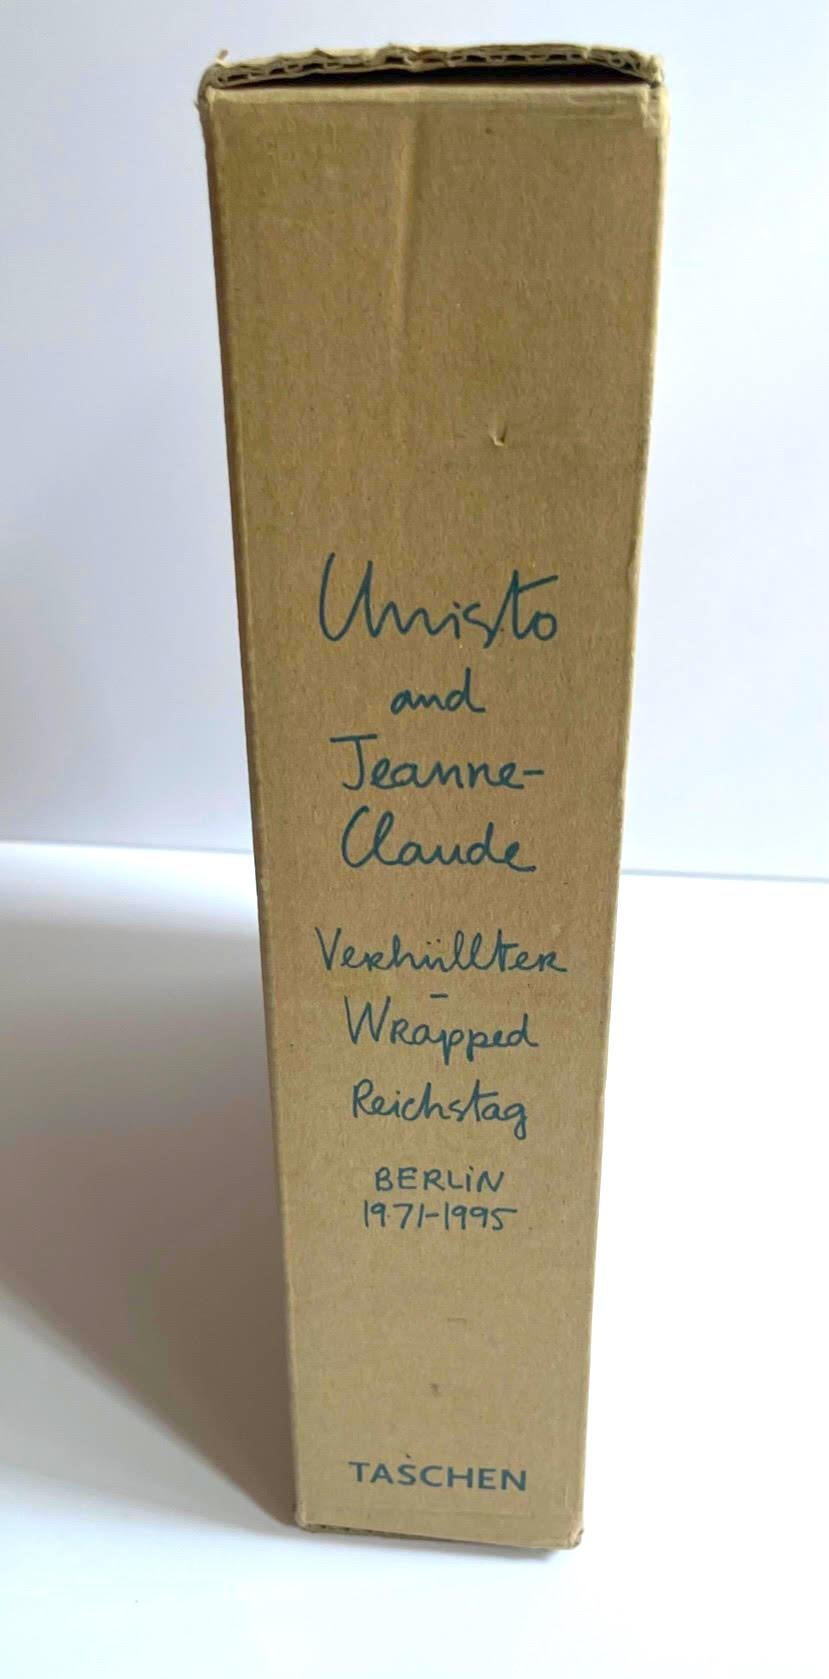 Christo and Jeanne-Claude: Wrapped Reichstag monograph & slipcase, LT Ed Signed For Sale 4